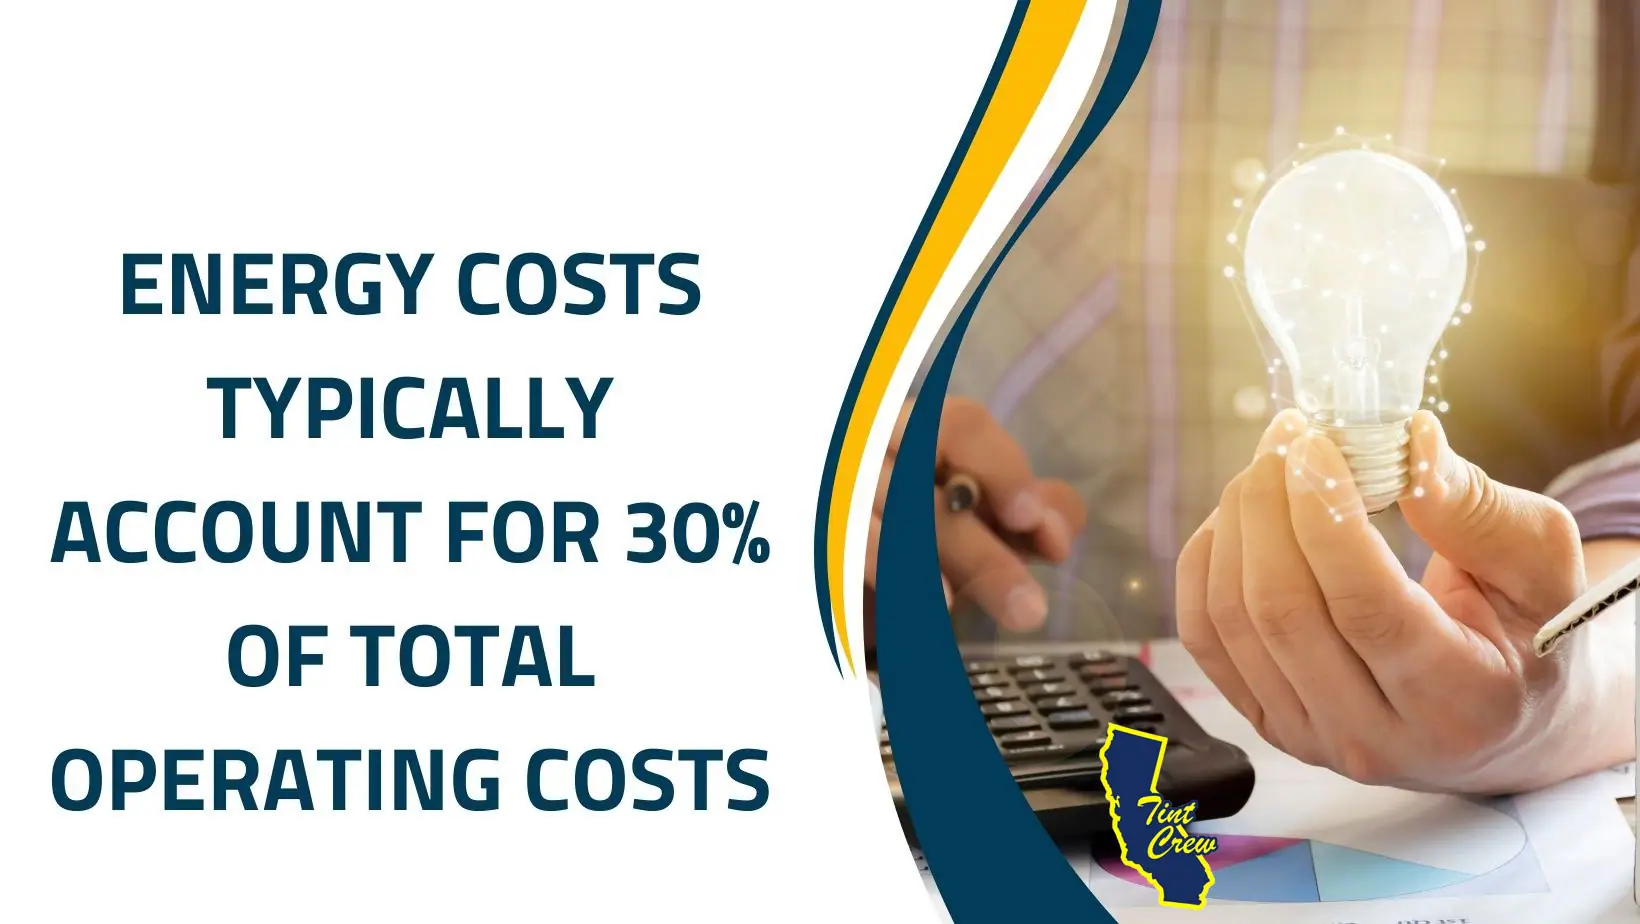 Energy Costs Typically Account for 30% of Total Operating Costs